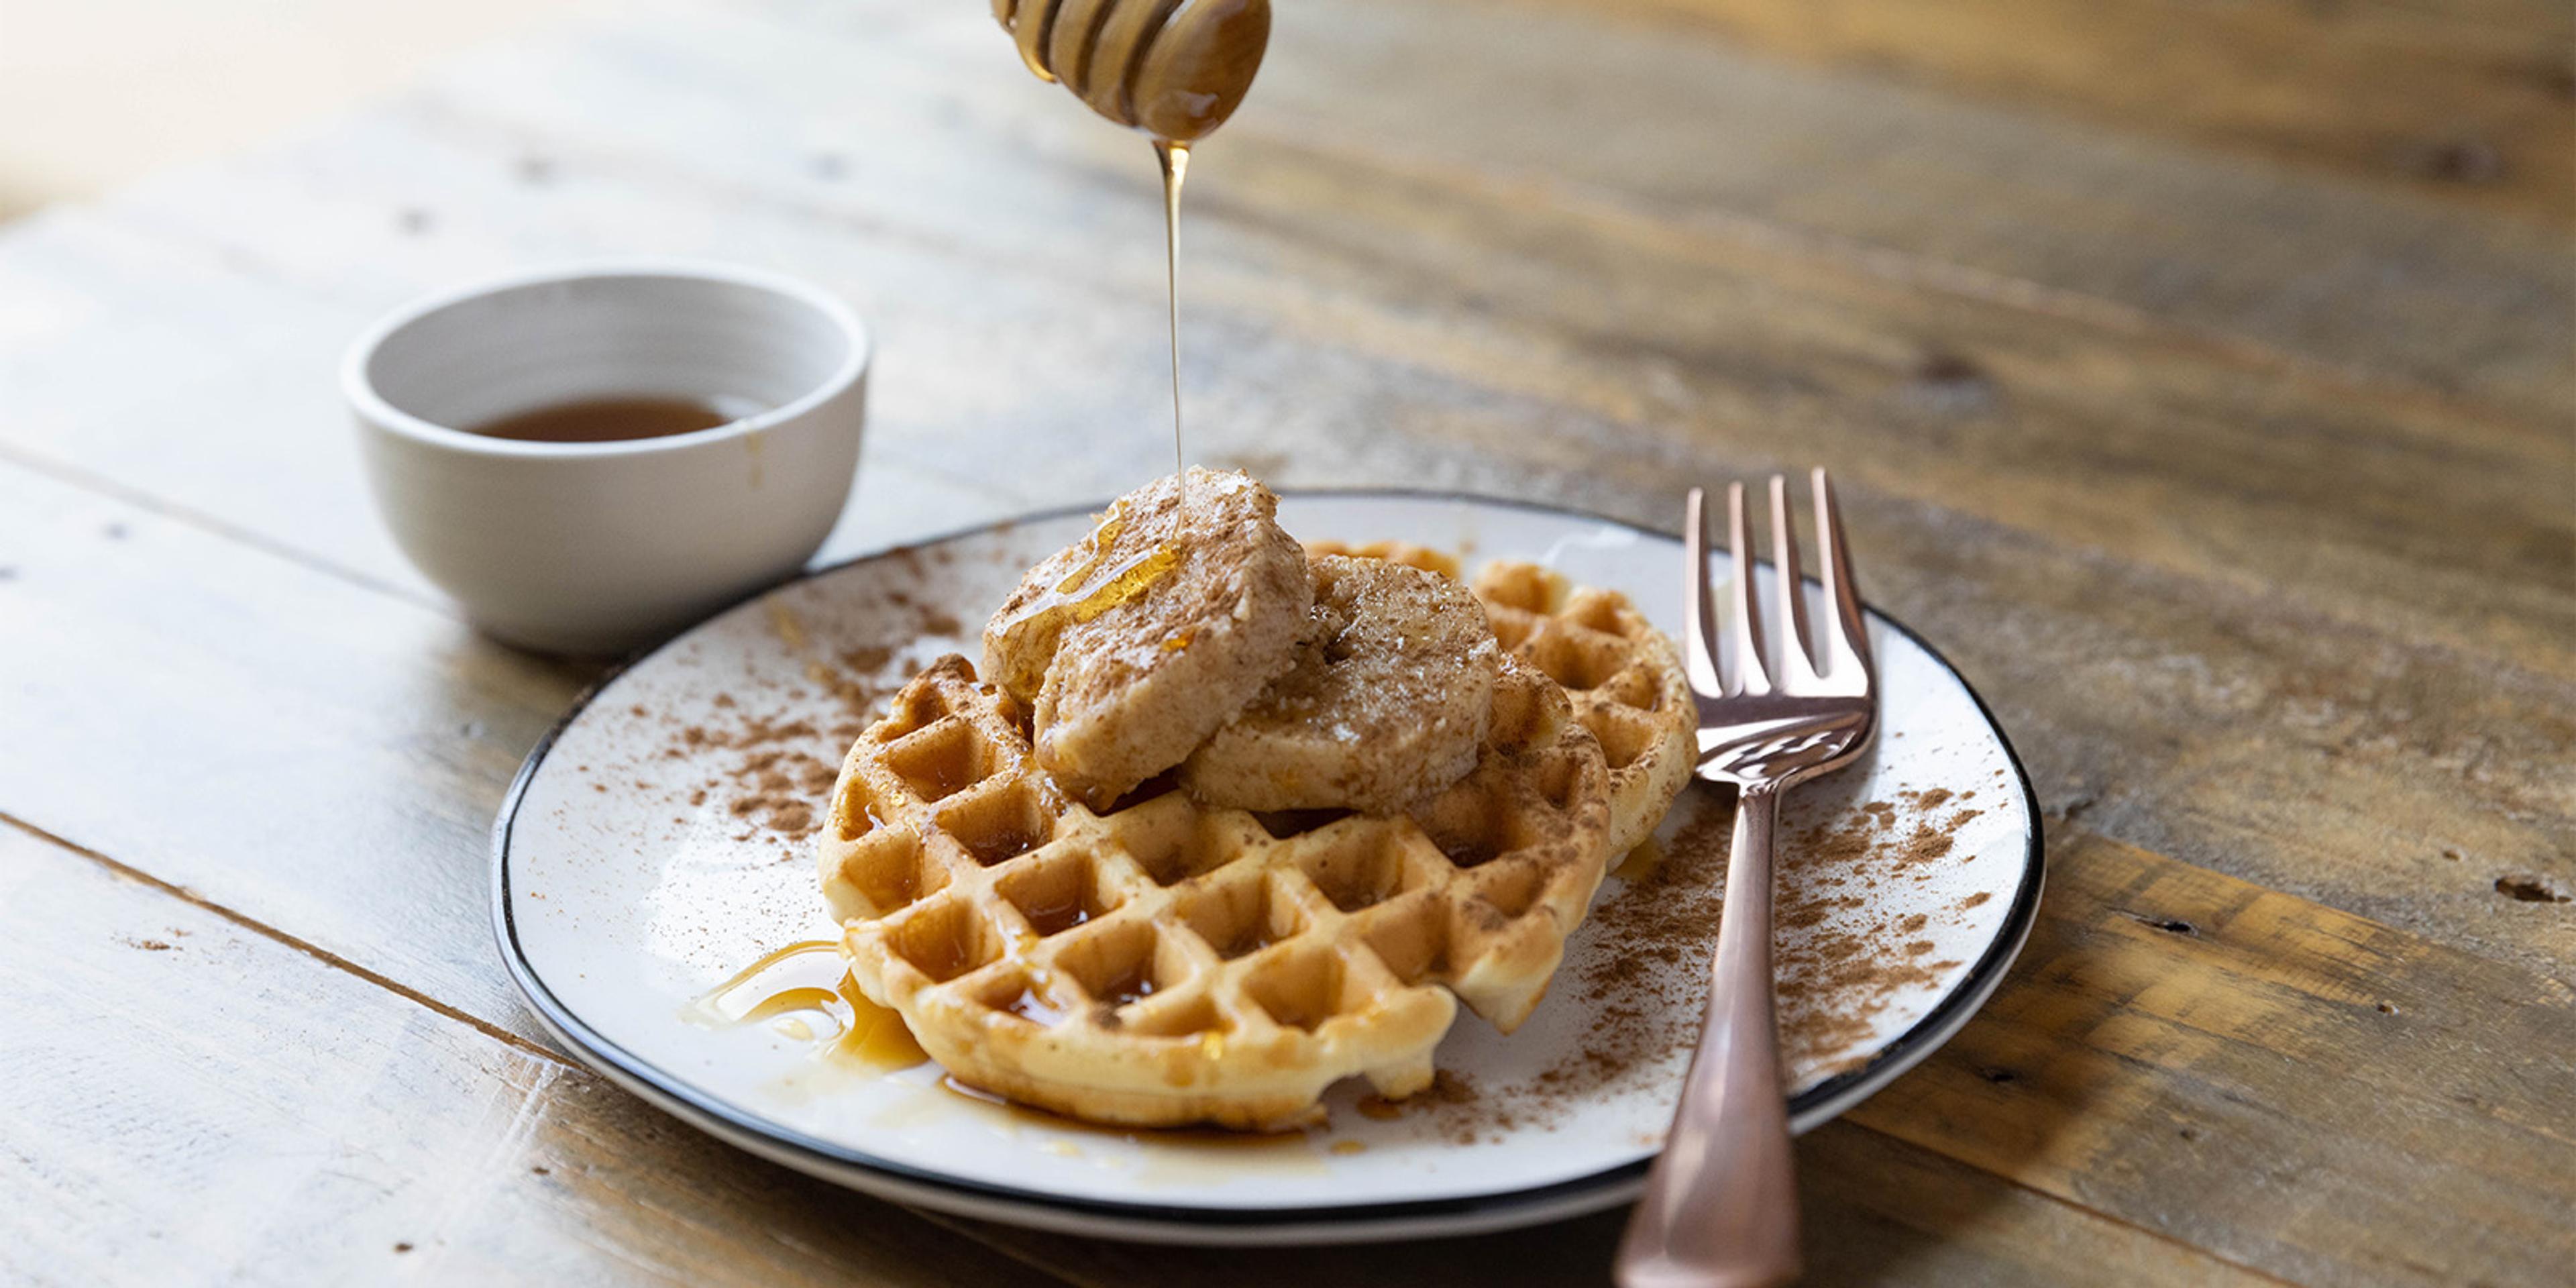 Honey is drizzled over a plate of waffles topped with Cinnamon Compound Butter.